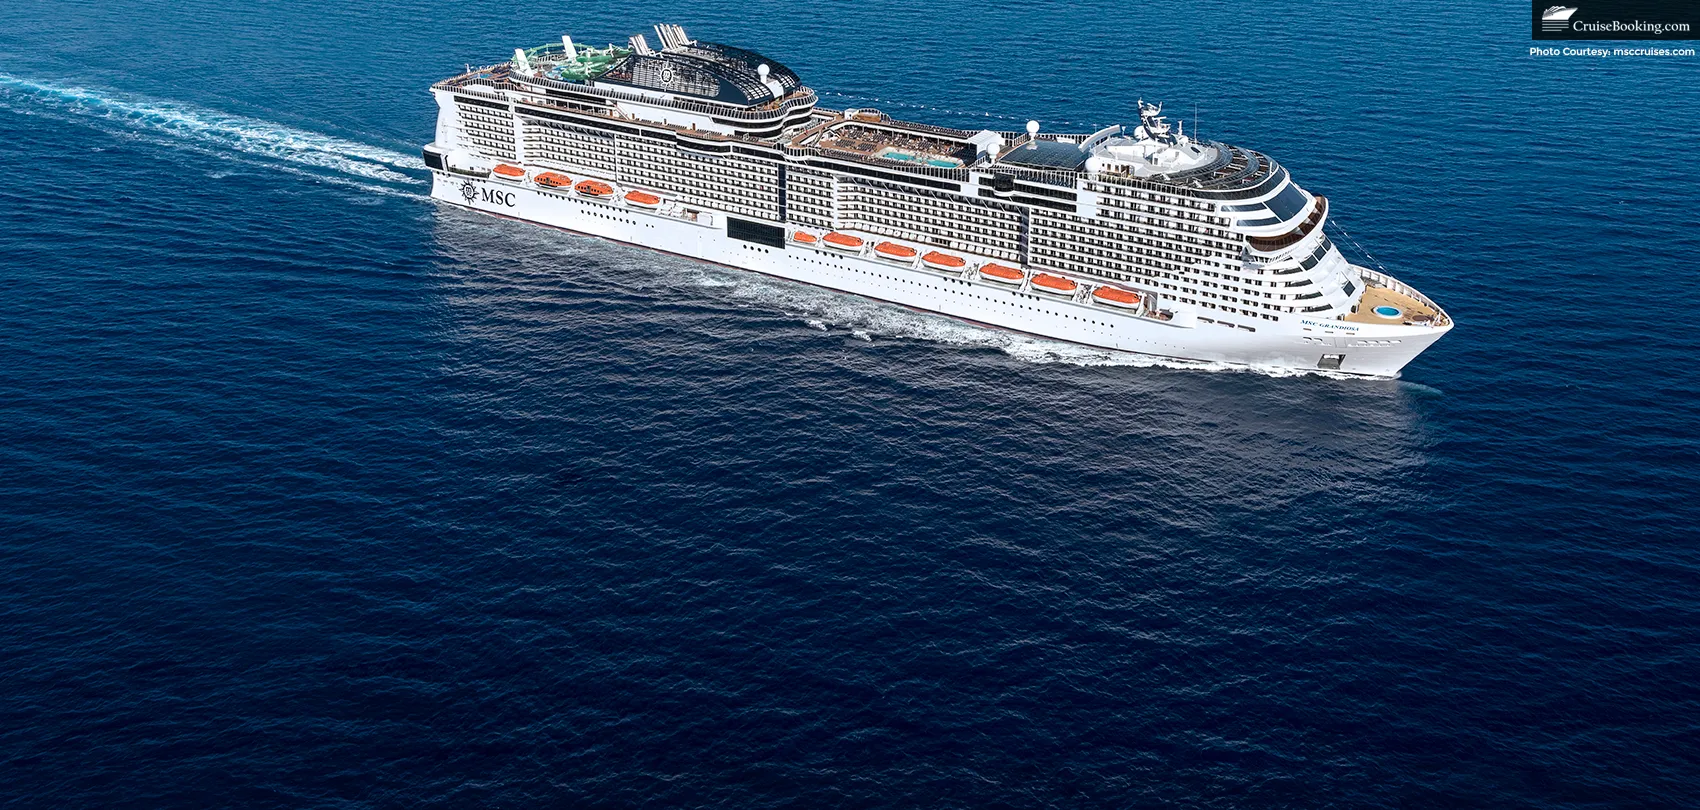 MSC’s Cruise Expansion Project at Port Canaveral